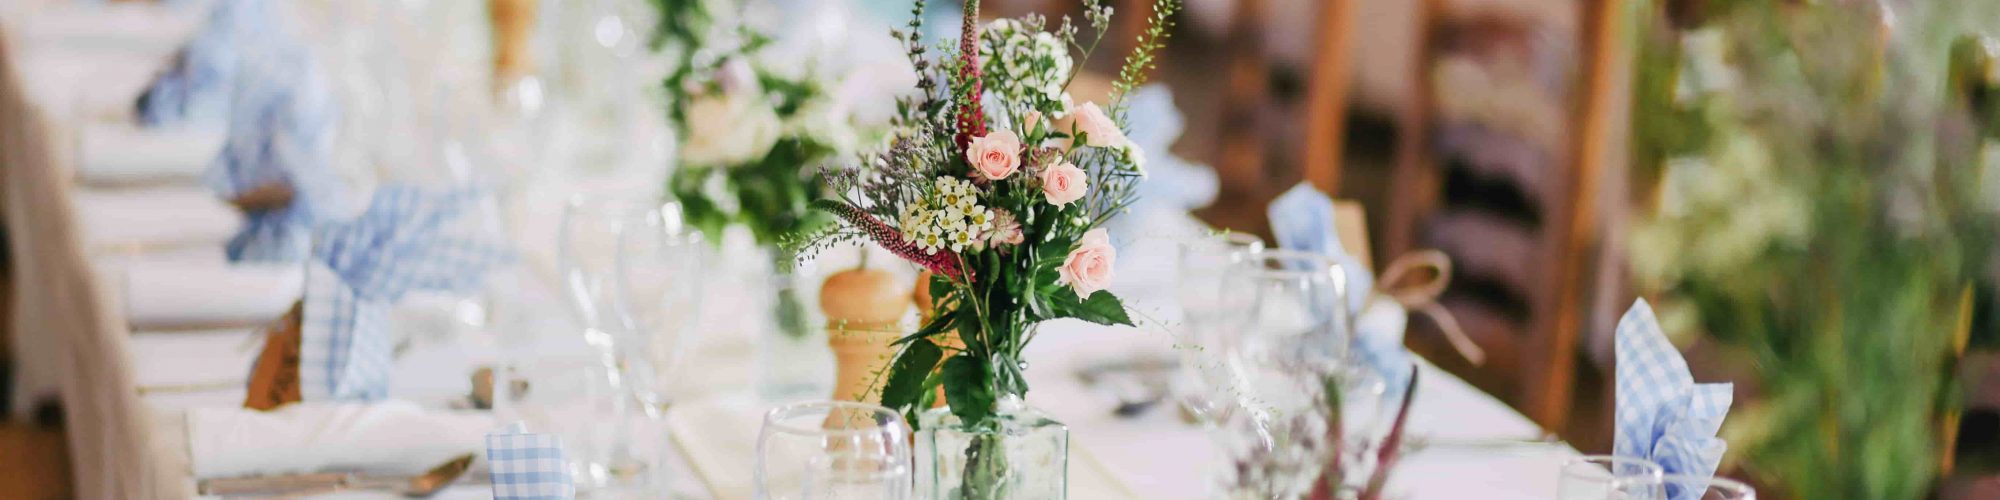 How to become a wedding planner